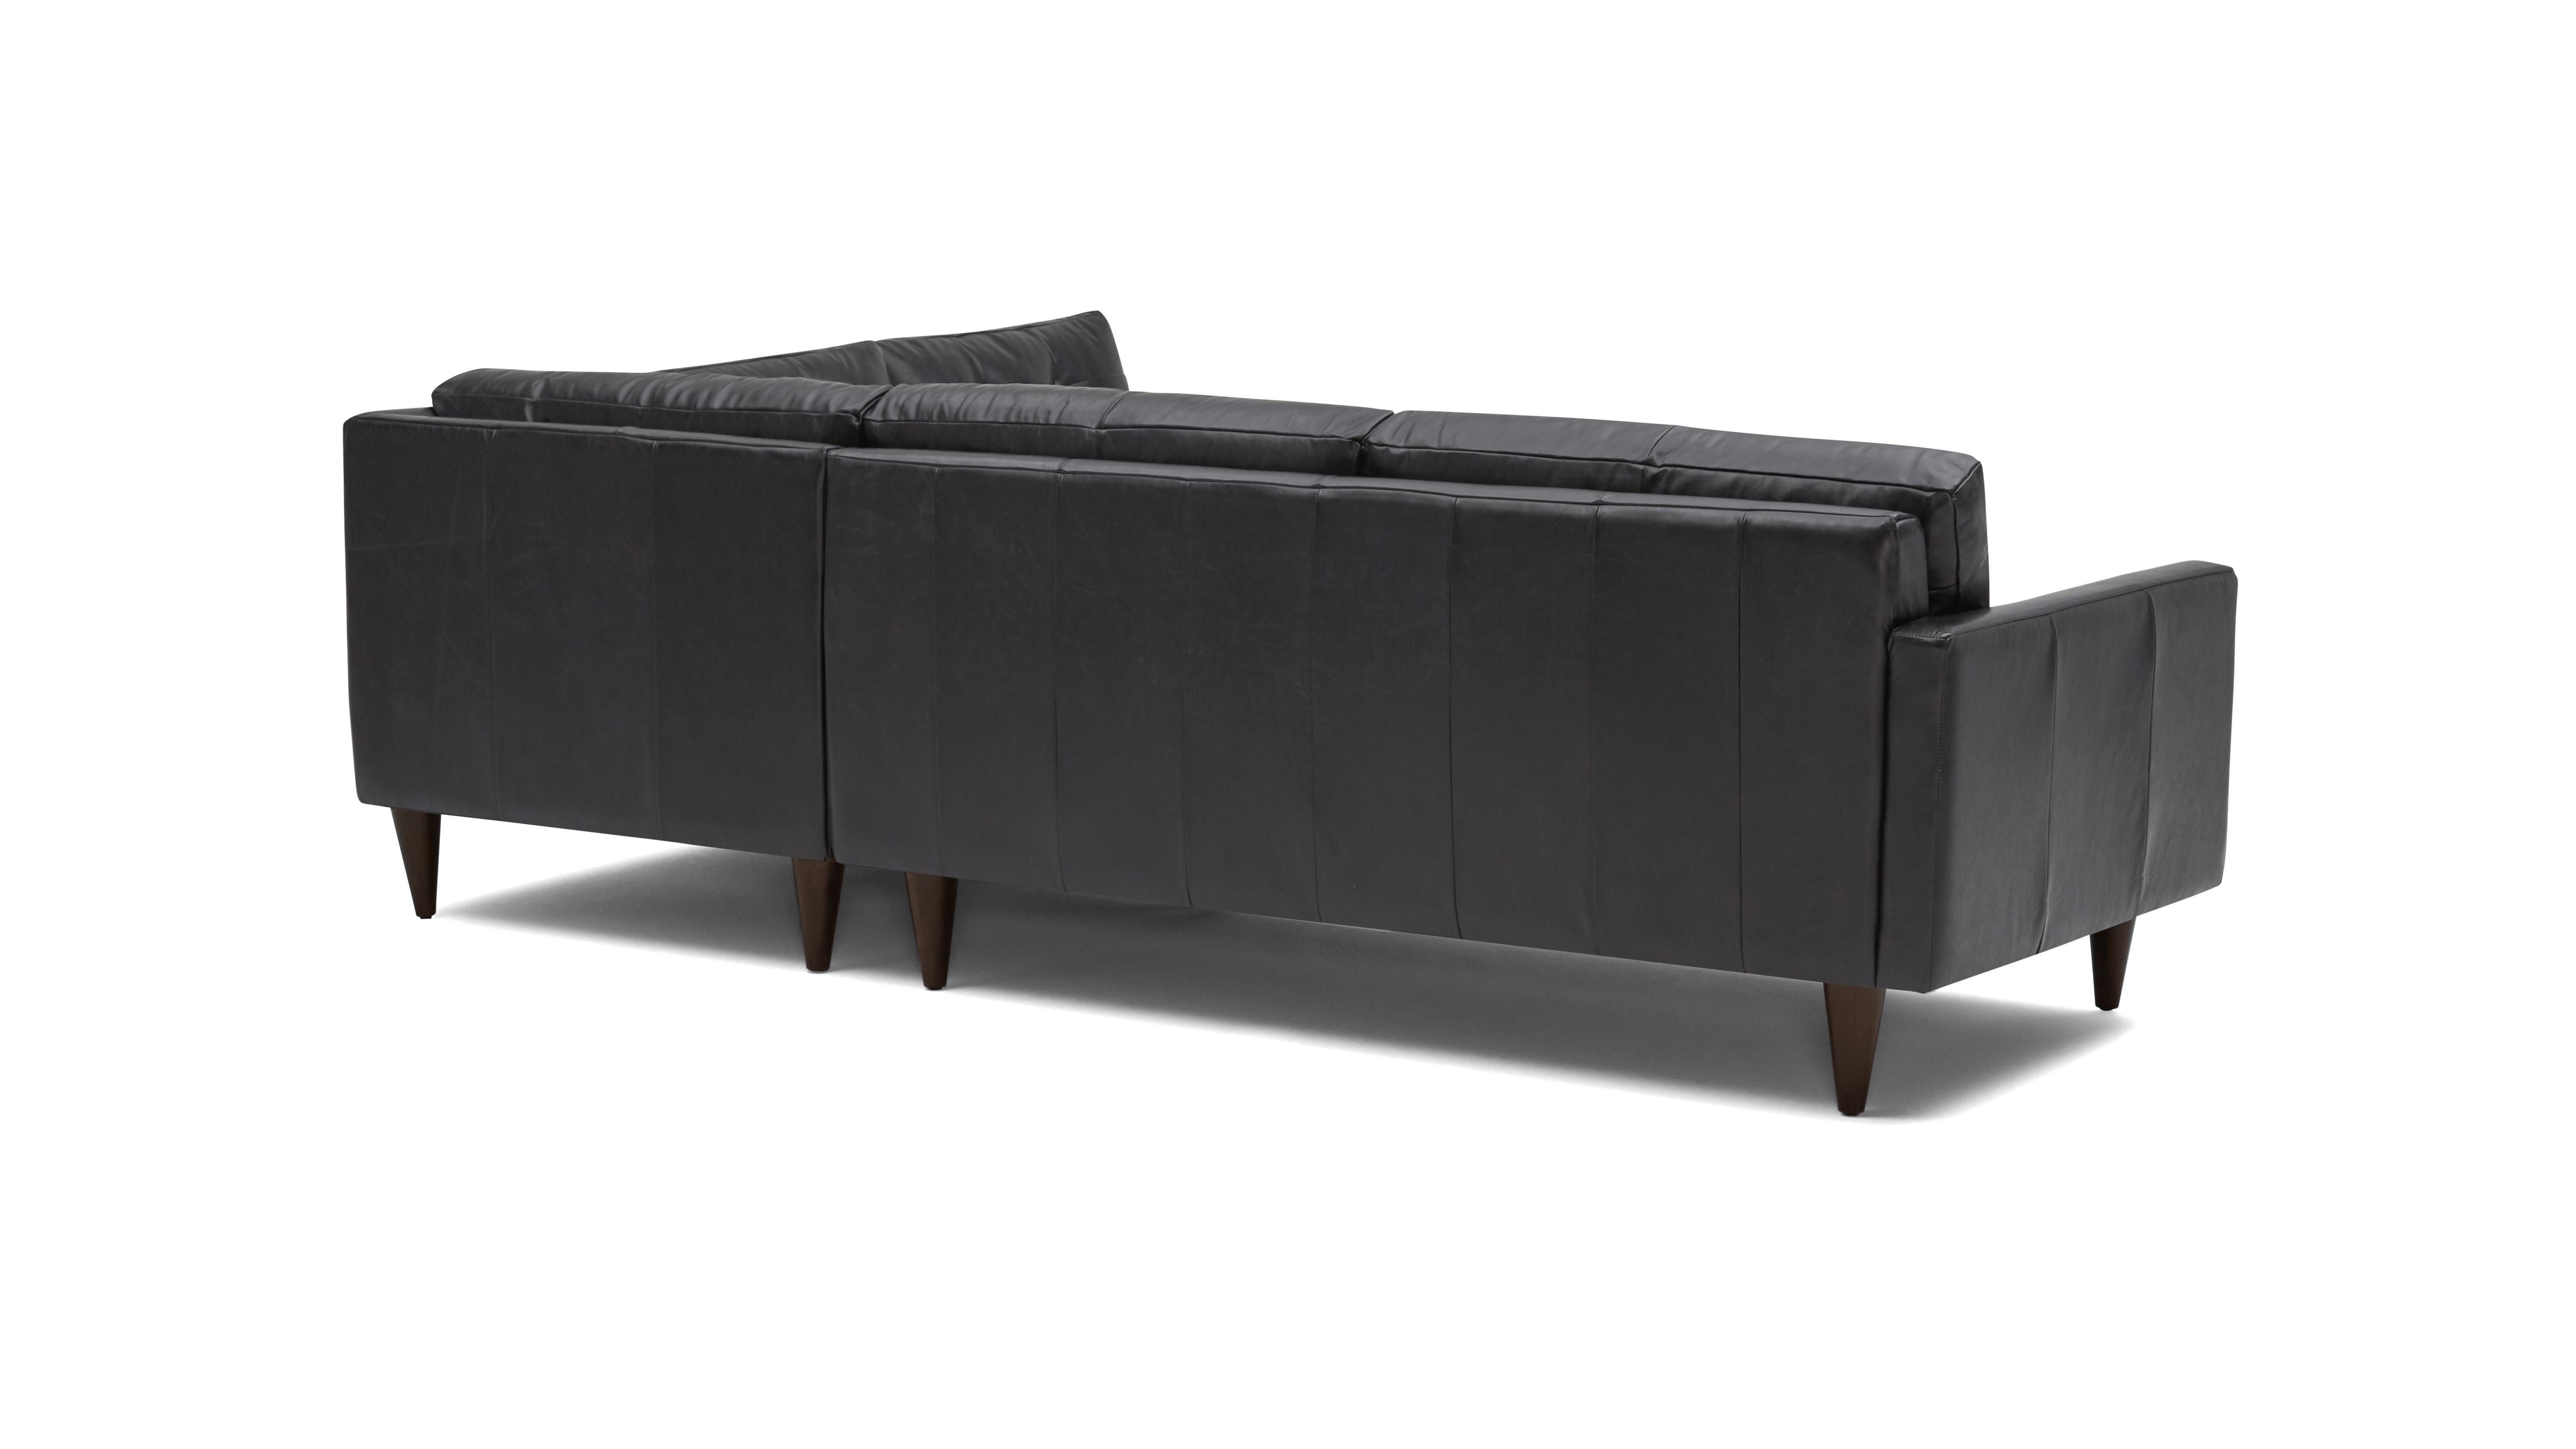 Black Eliot Mid Century Modern Leather Sectional with Bumper - Santiago Steel - Mocha - Right  - Image 3